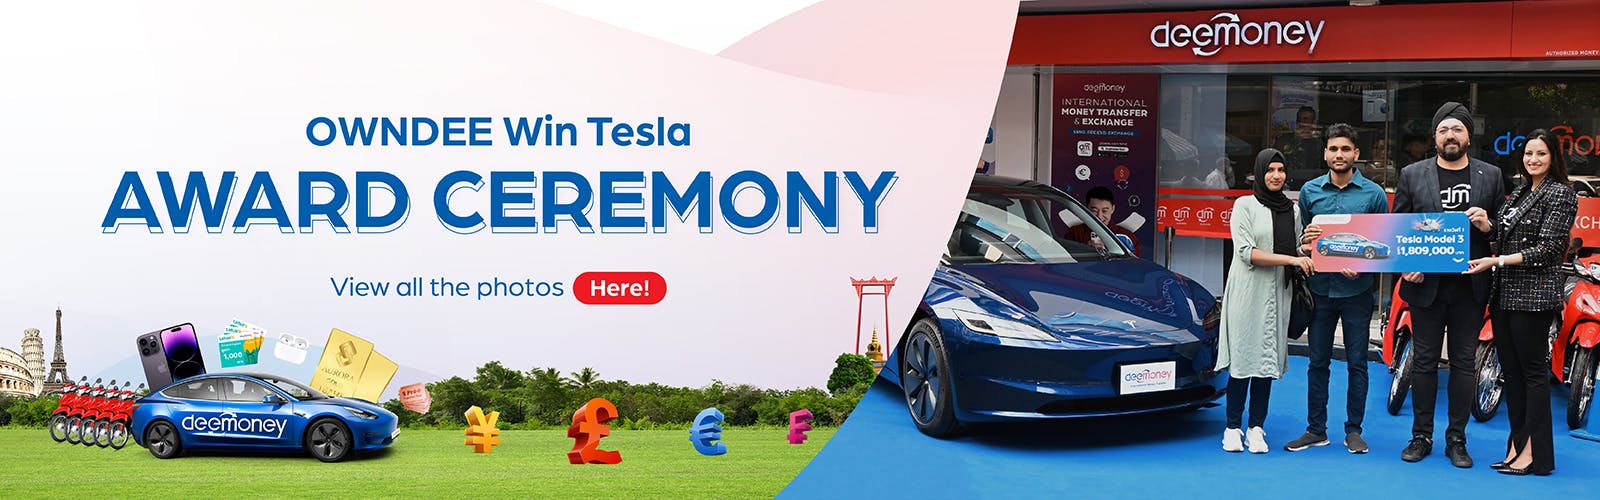 Congratulations to all the winners and thank you for participating in the OWNDEE WIN TESLA campaign